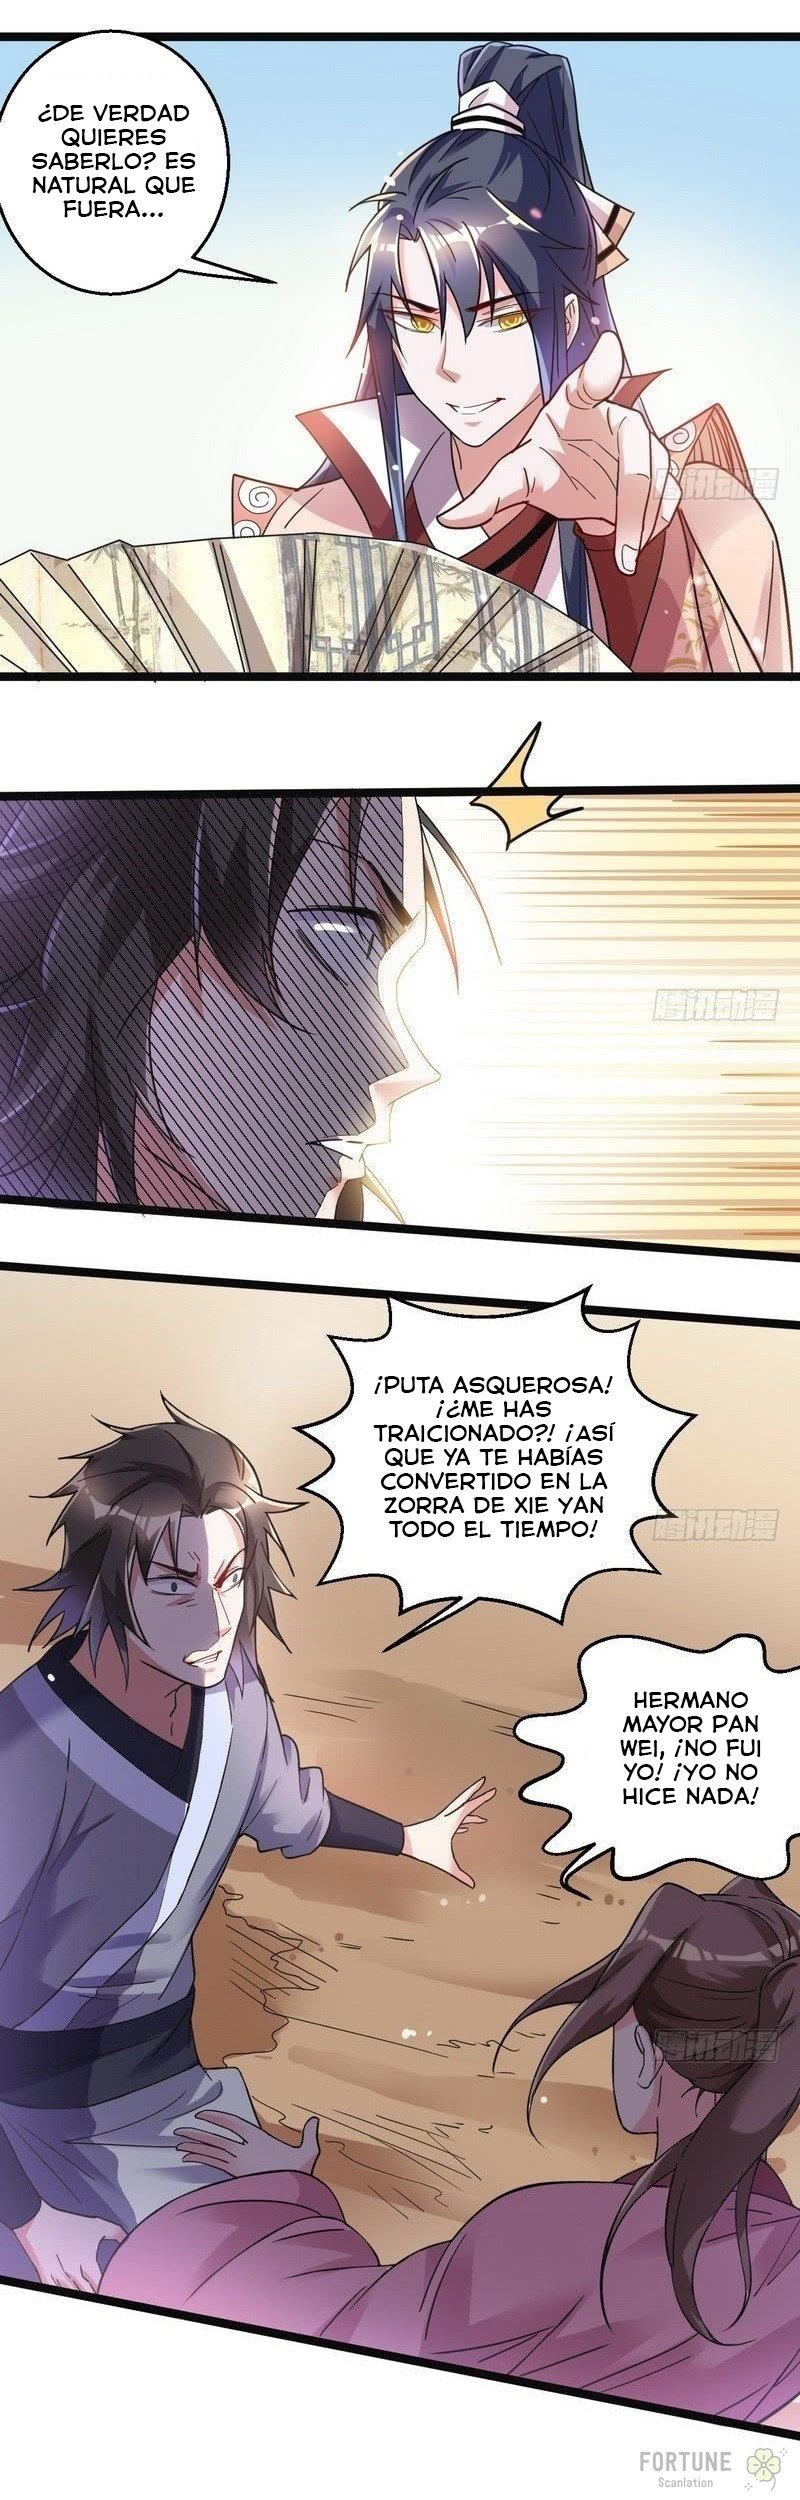 Manga Soy un dios maligno Chapter 7 image number 6